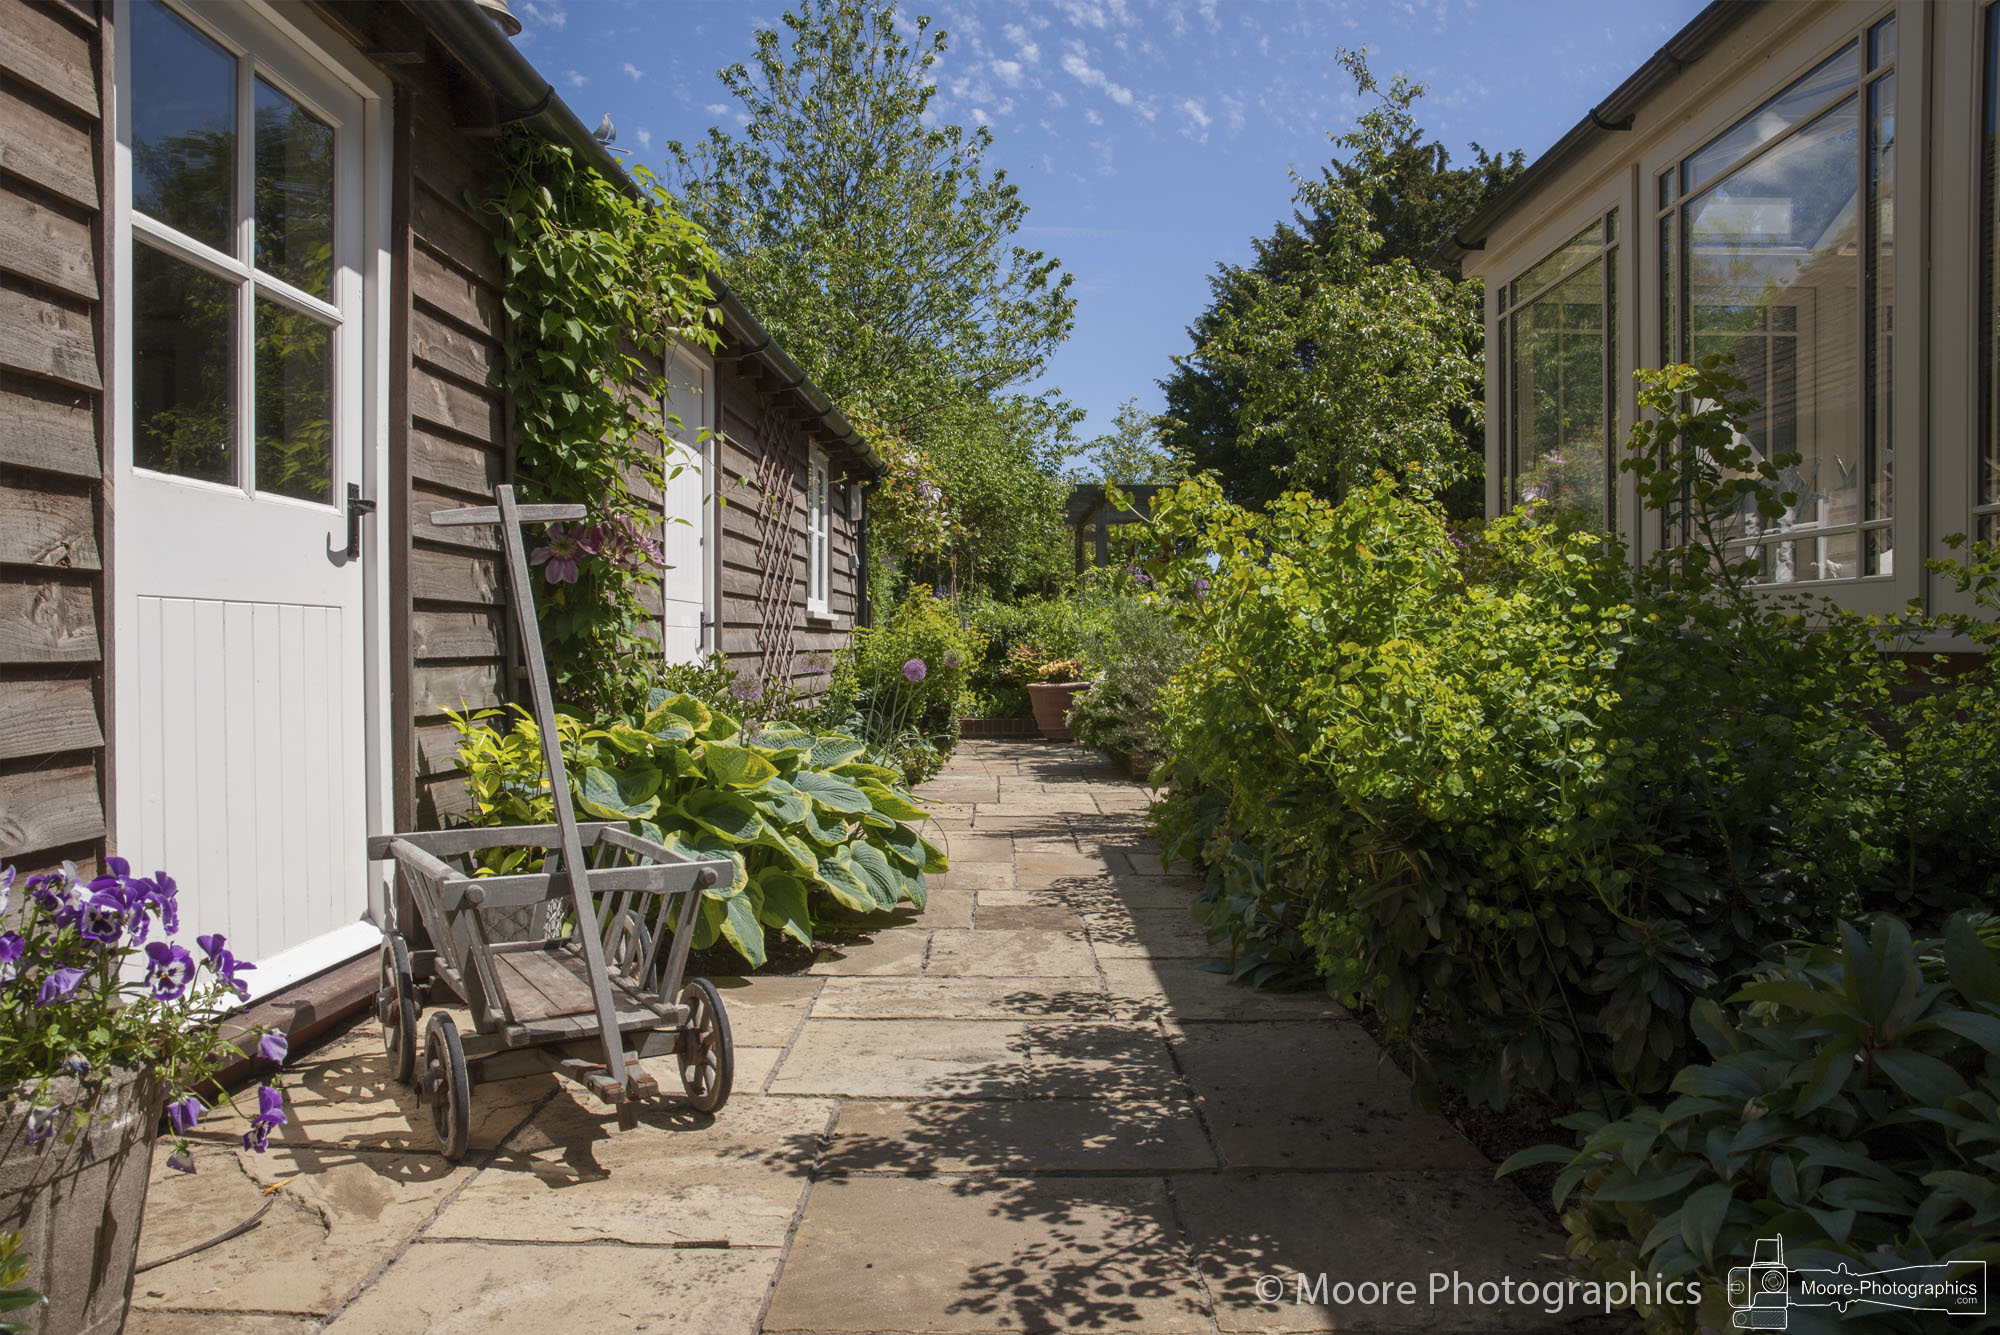 Moore Photographics - Gardens and Landscape Photography